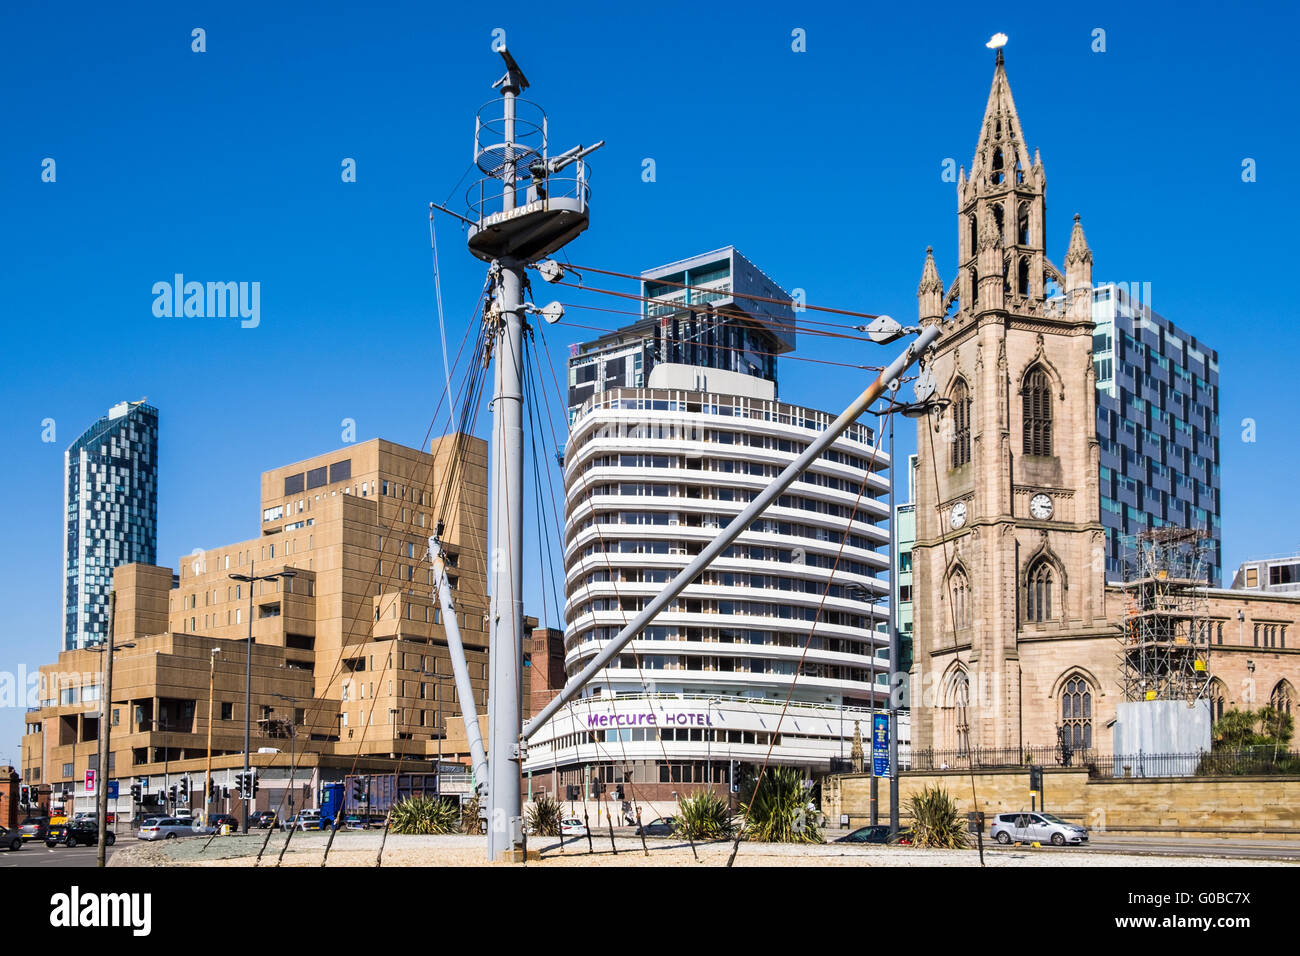 Mercure Hotel & skyline, Liverpool, Merseyside, Angleterre, Royaume-Uni Banque D'Images